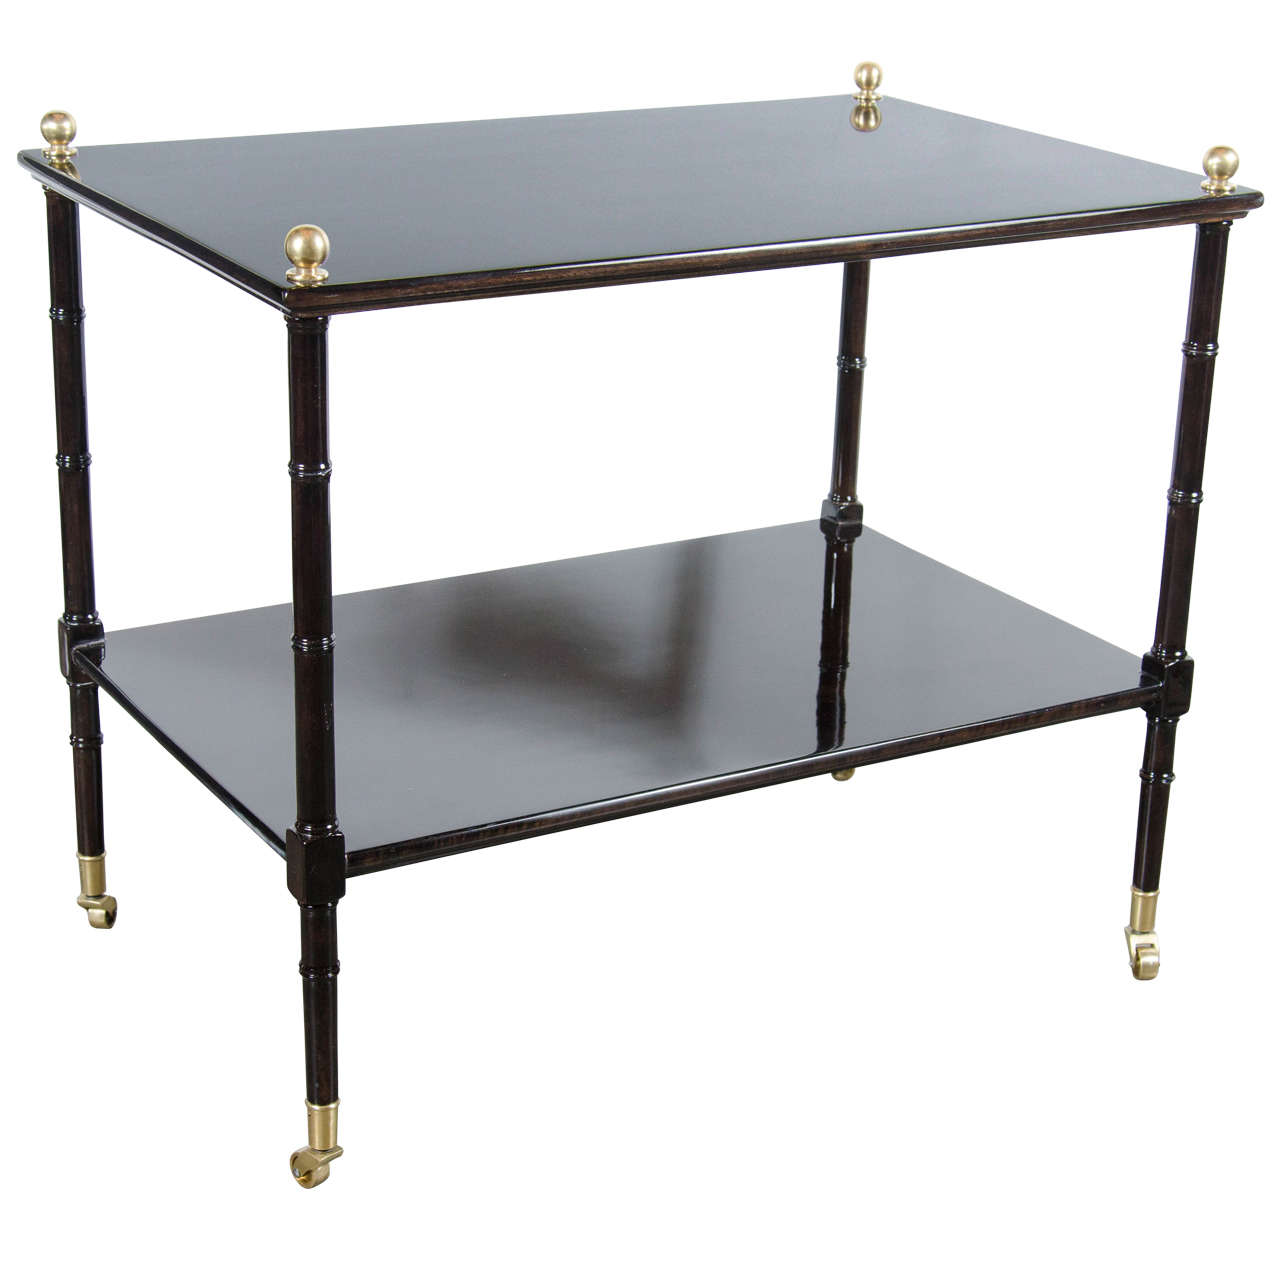 Mid-Century Modern Two-Tier Occasional Table in Ebonized Walnut and Brass